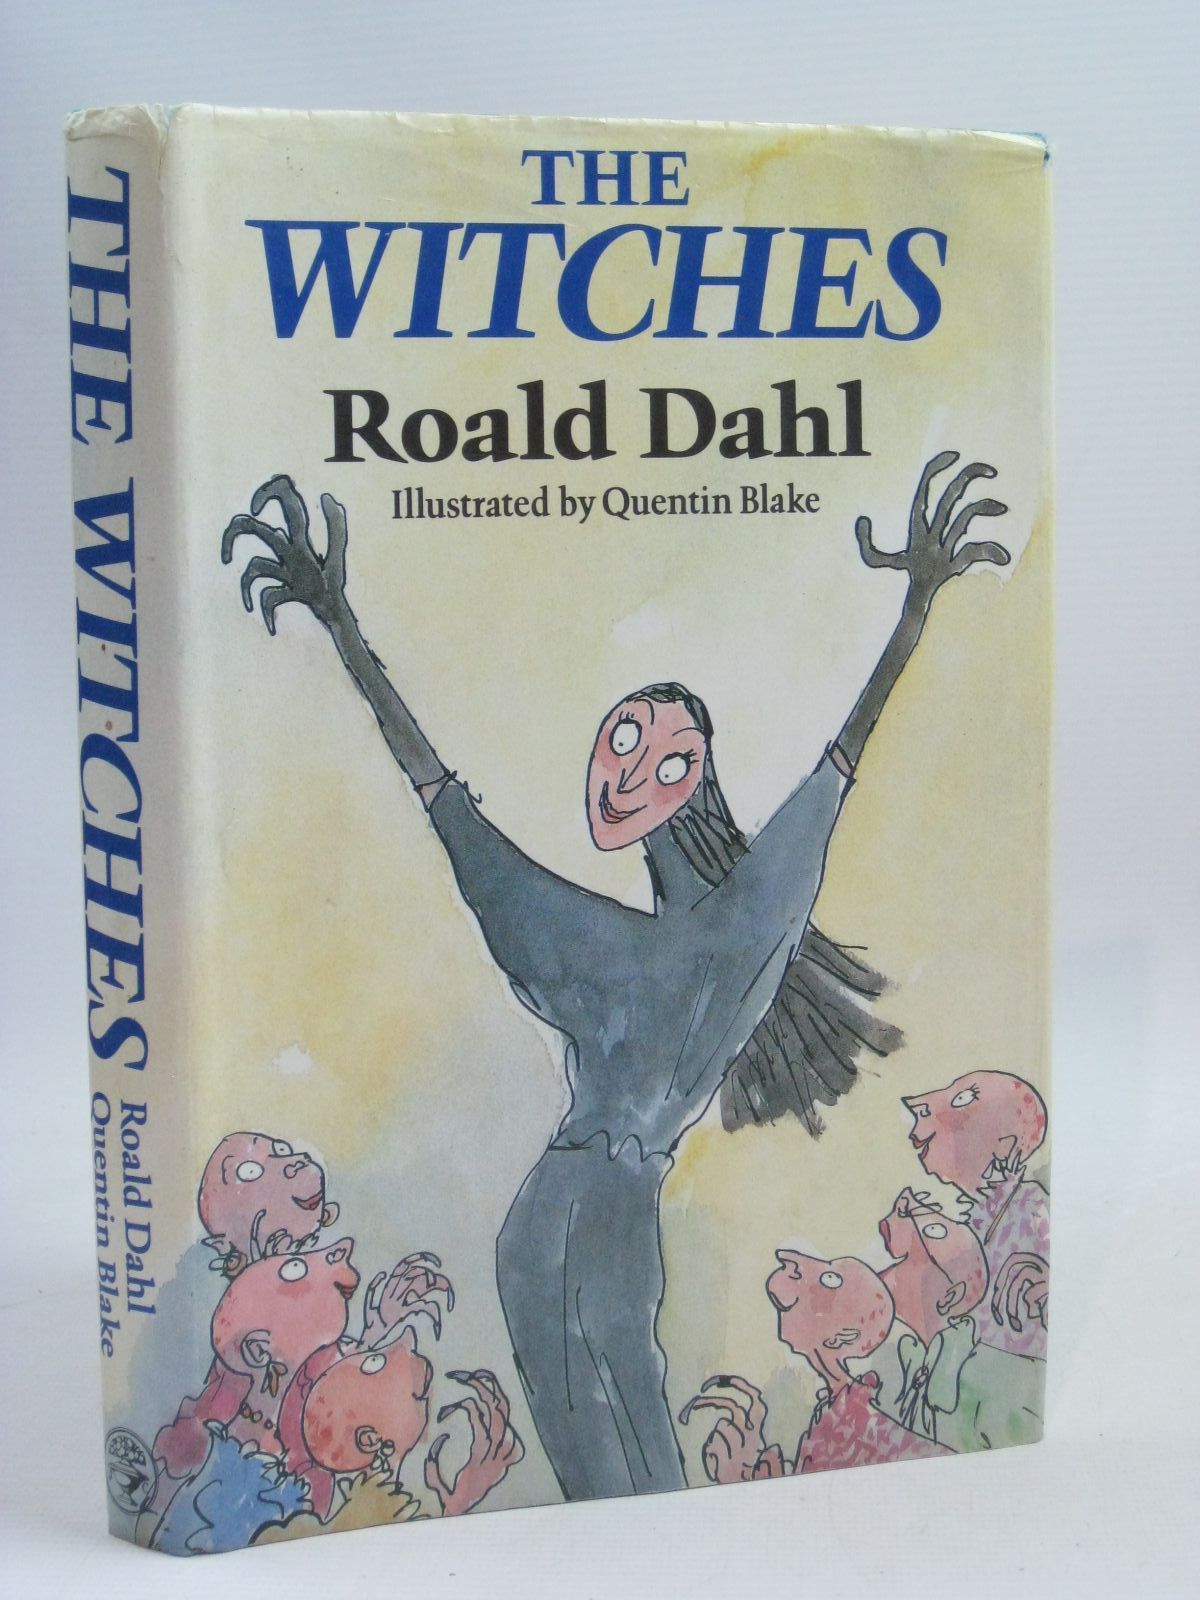 Cover of THE WITCHES by Roald Dahl